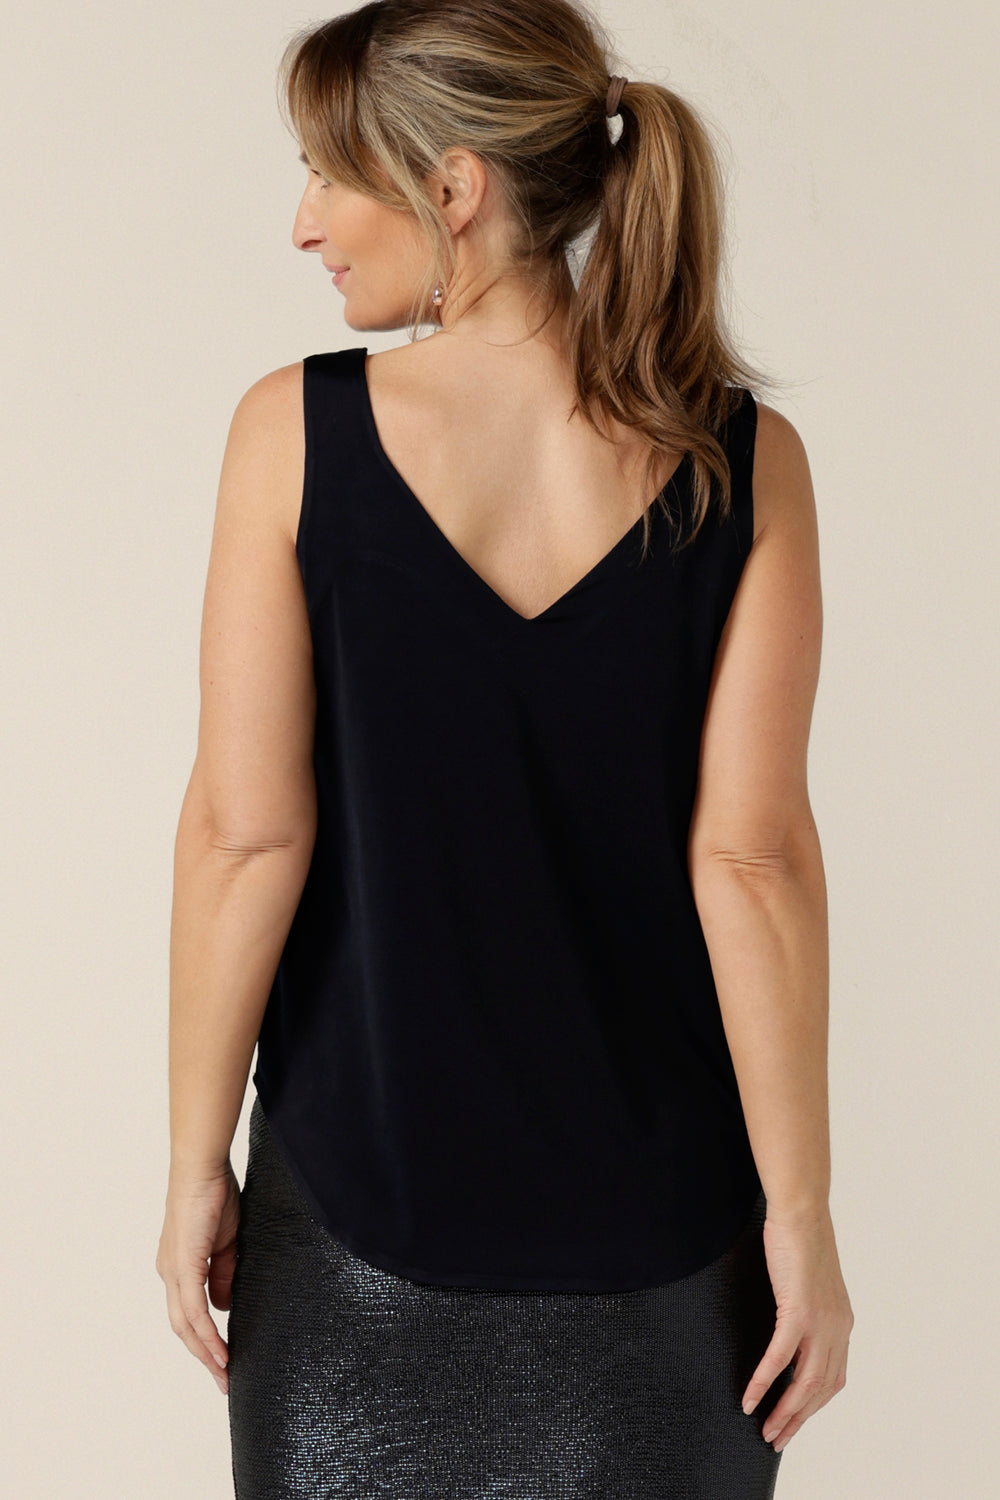 Back view of a woman wearing a V-neck, navy cami top with wide shoulder straps. Made in Australia by Australian and New Zealand women's clothing company, this slinky jersey top wears well with evening and occasionwear skirts, pants and suit jackets.